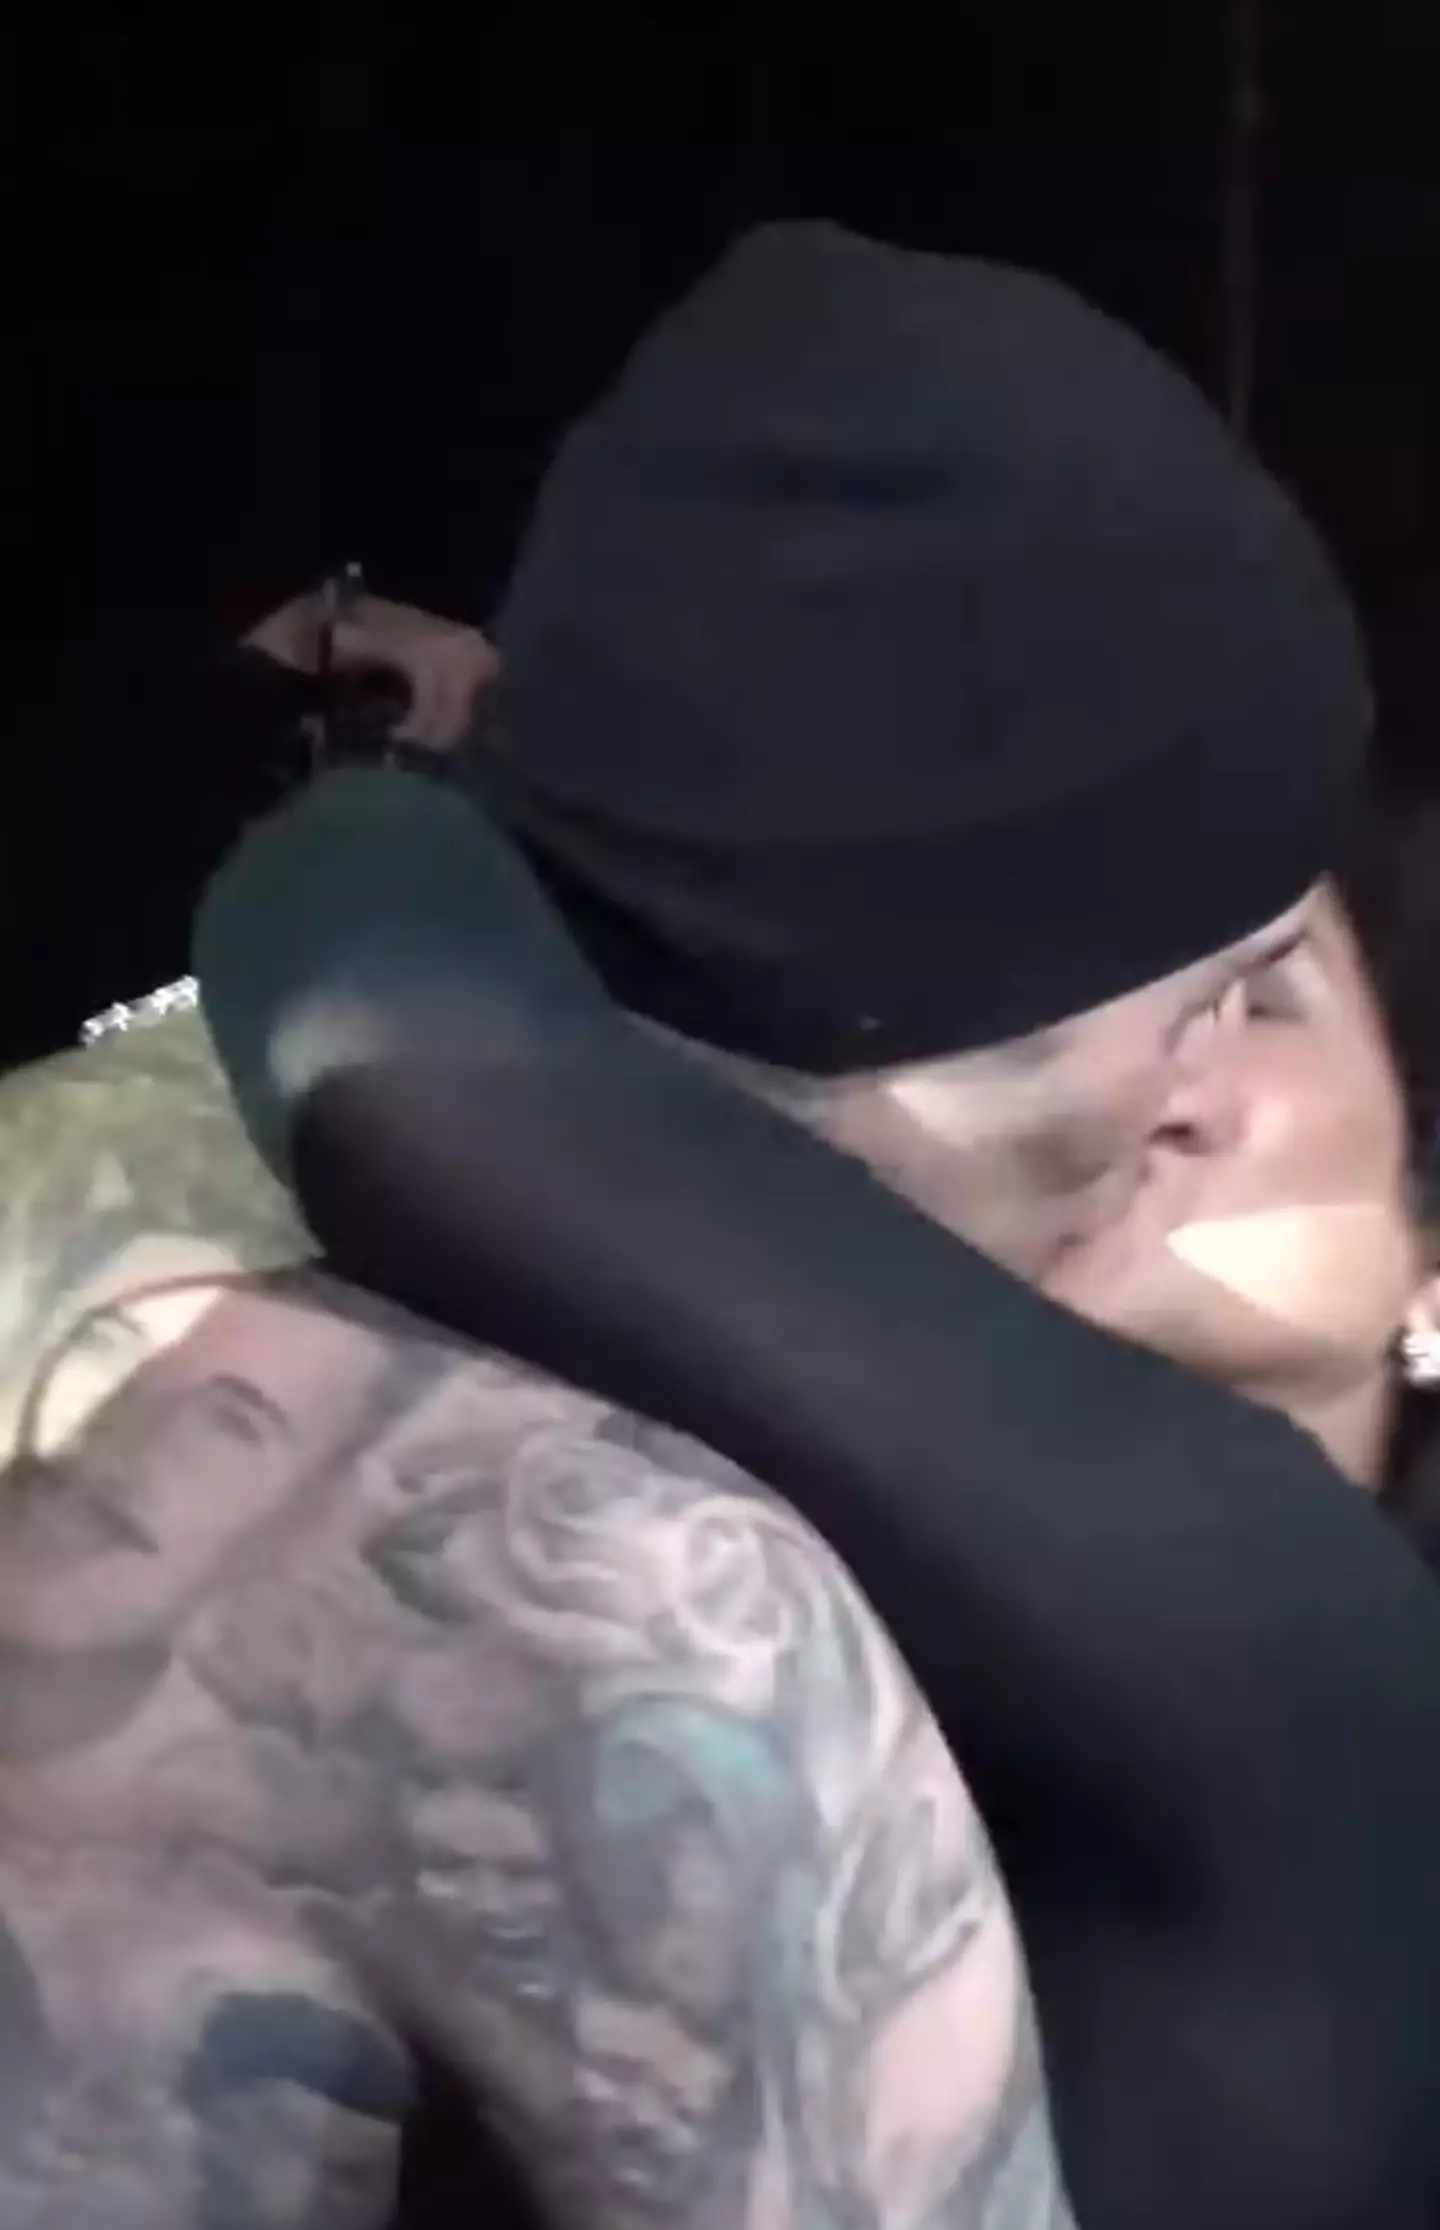 The pair shared an embrace after Travis climbed down off stage.